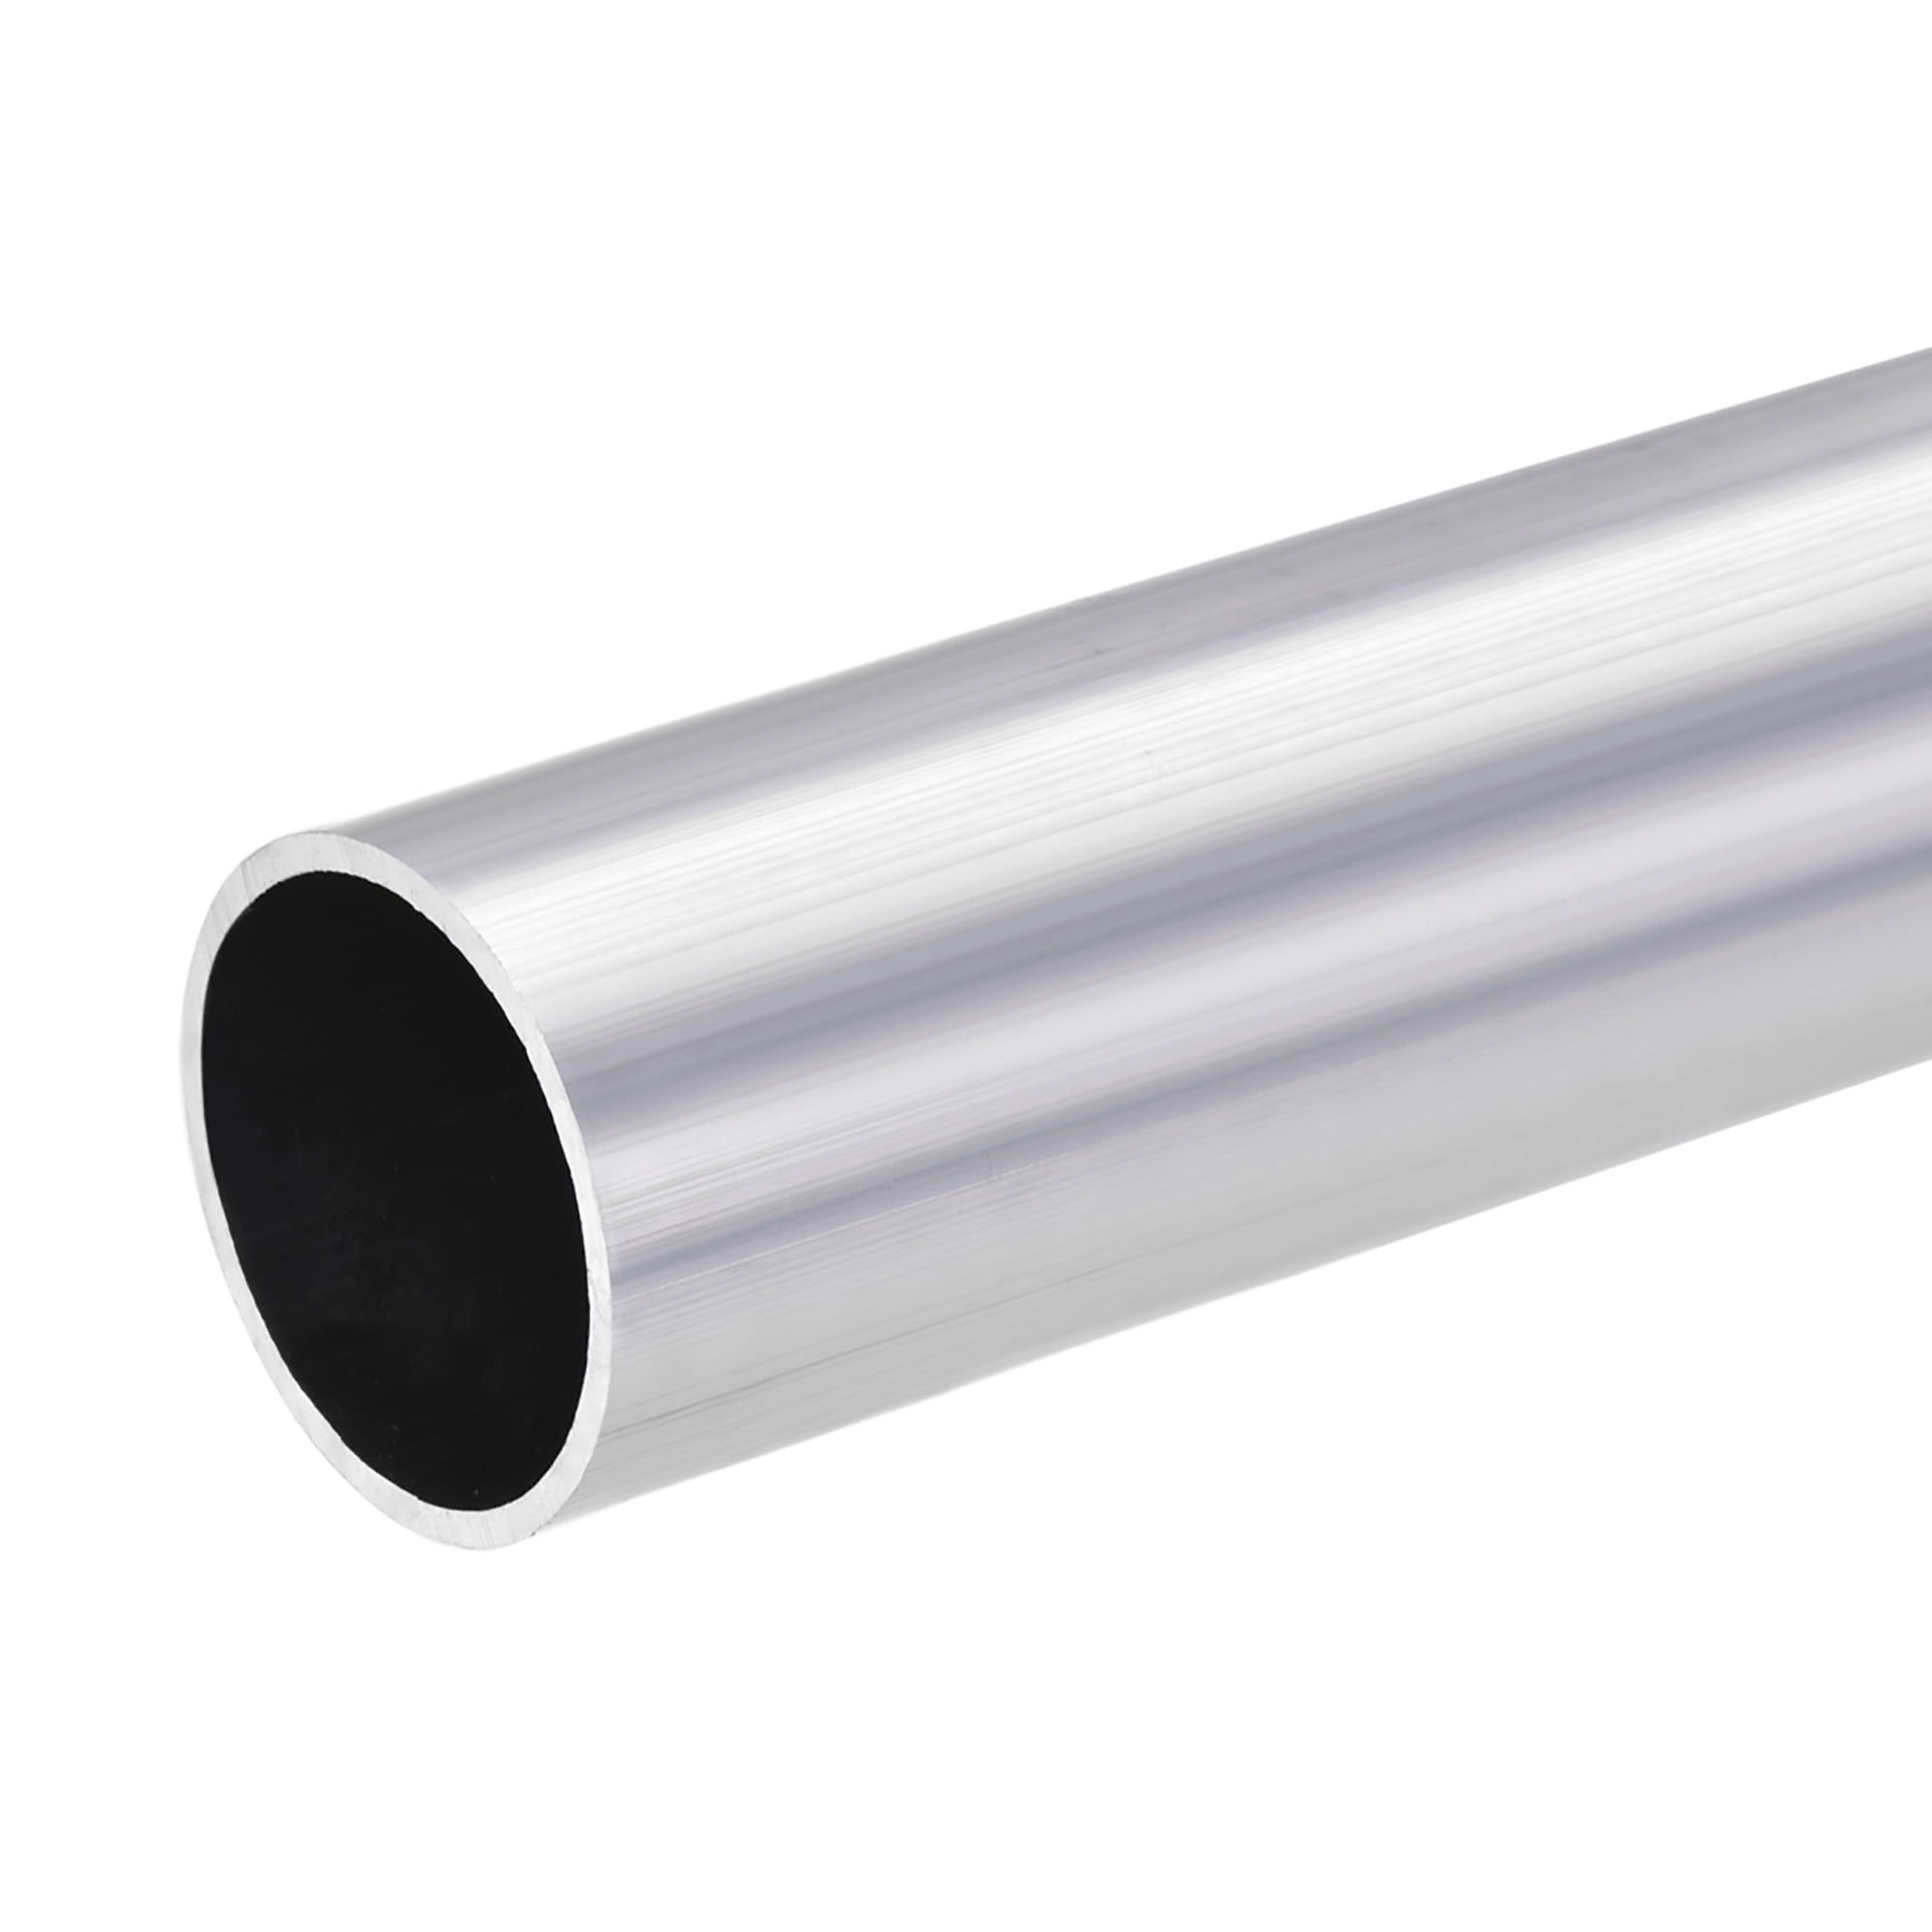 2 thickness lengths up to 100mm ALUMINIUM ROUND TUBE 25mm 1000mm 